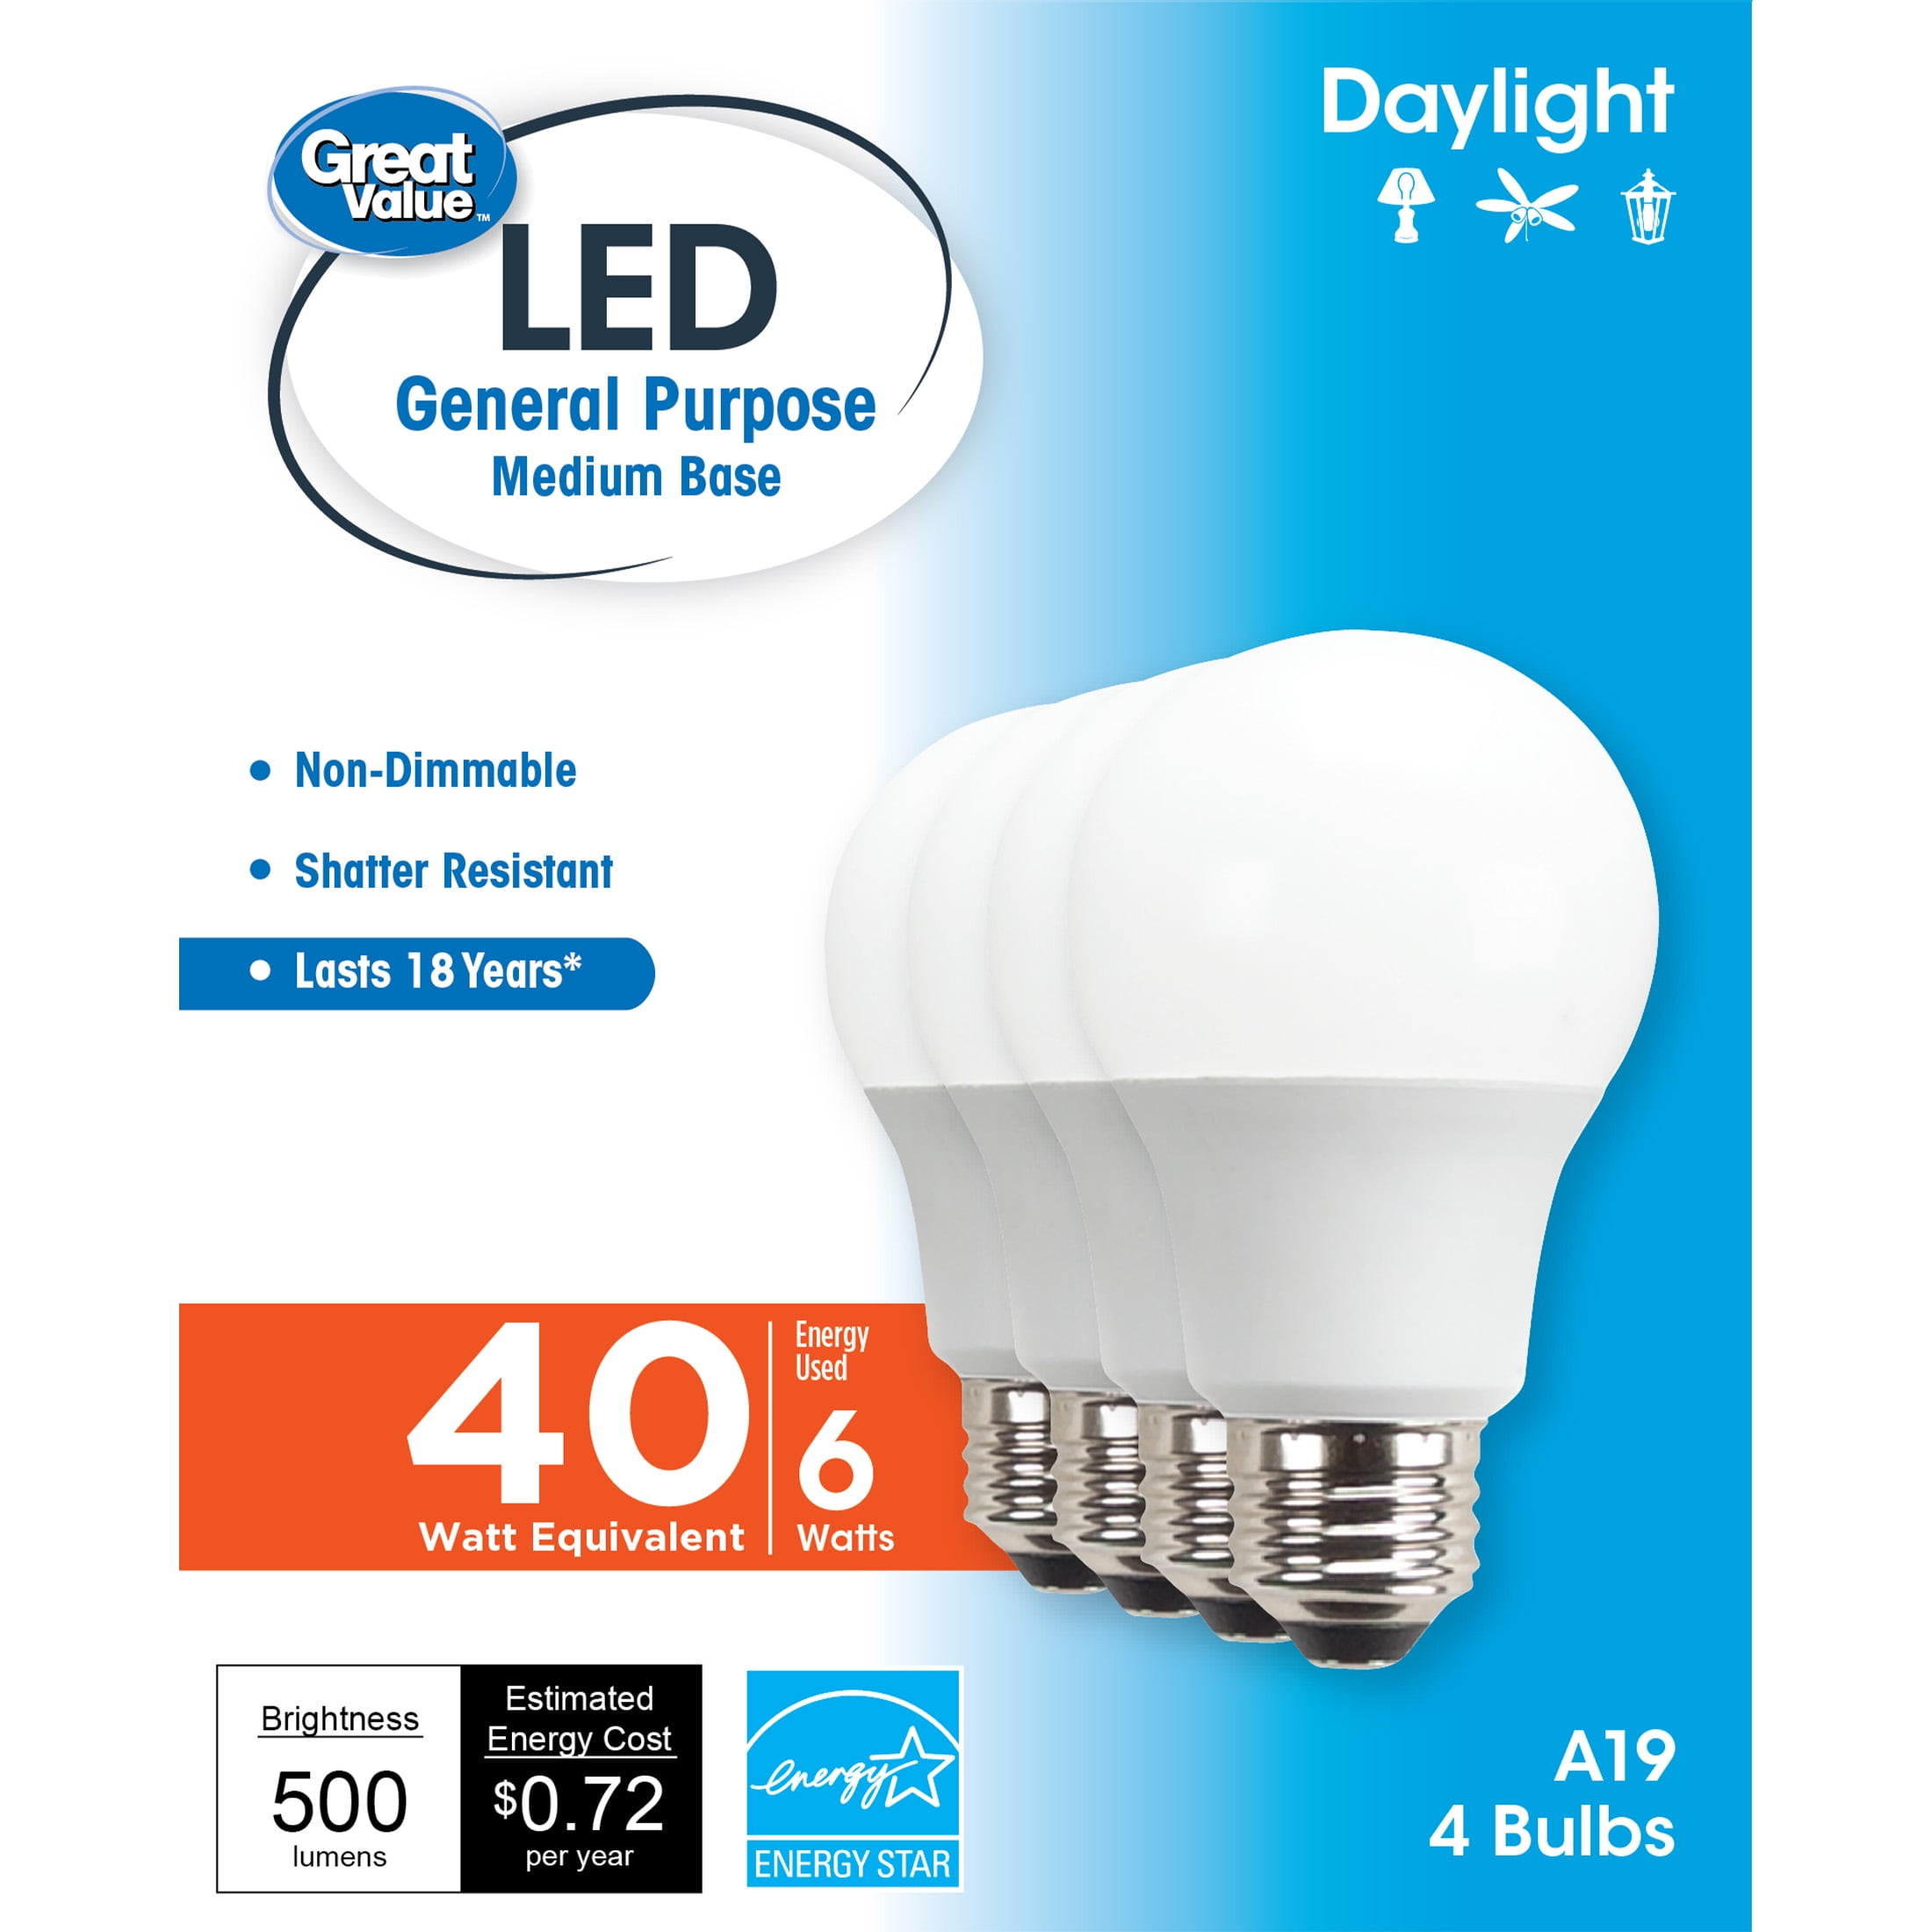 Great Value LED Bulb, 6W (40W Equivalent) A19 General Purpose Lamp E26 Medium Base, Non-dimmable, Daylight, 4-Pack - Walmart.com